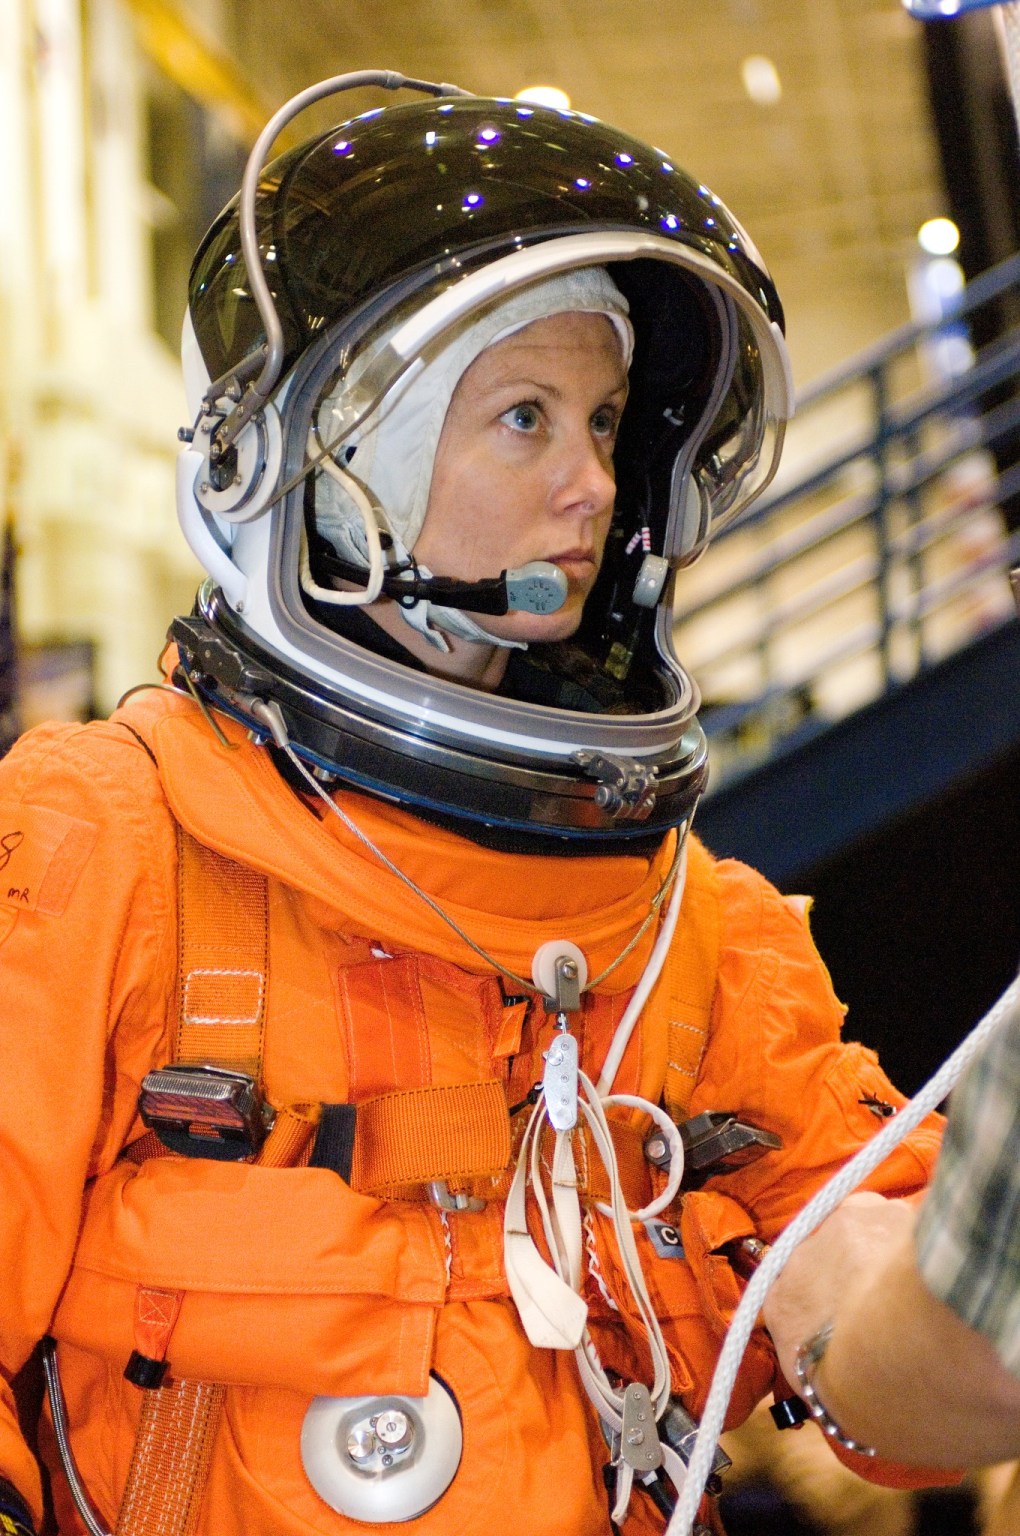 Attired in a training version of her shuttle launch and entry suit, astronaut Tracy E. Caldwell, STS-118 mission specialist, participates in a training session on the usage of a special device, used to lower oneself from a troubled shuttle, in the Space Vehicle Mockup Facility at the Johnson Space Center.